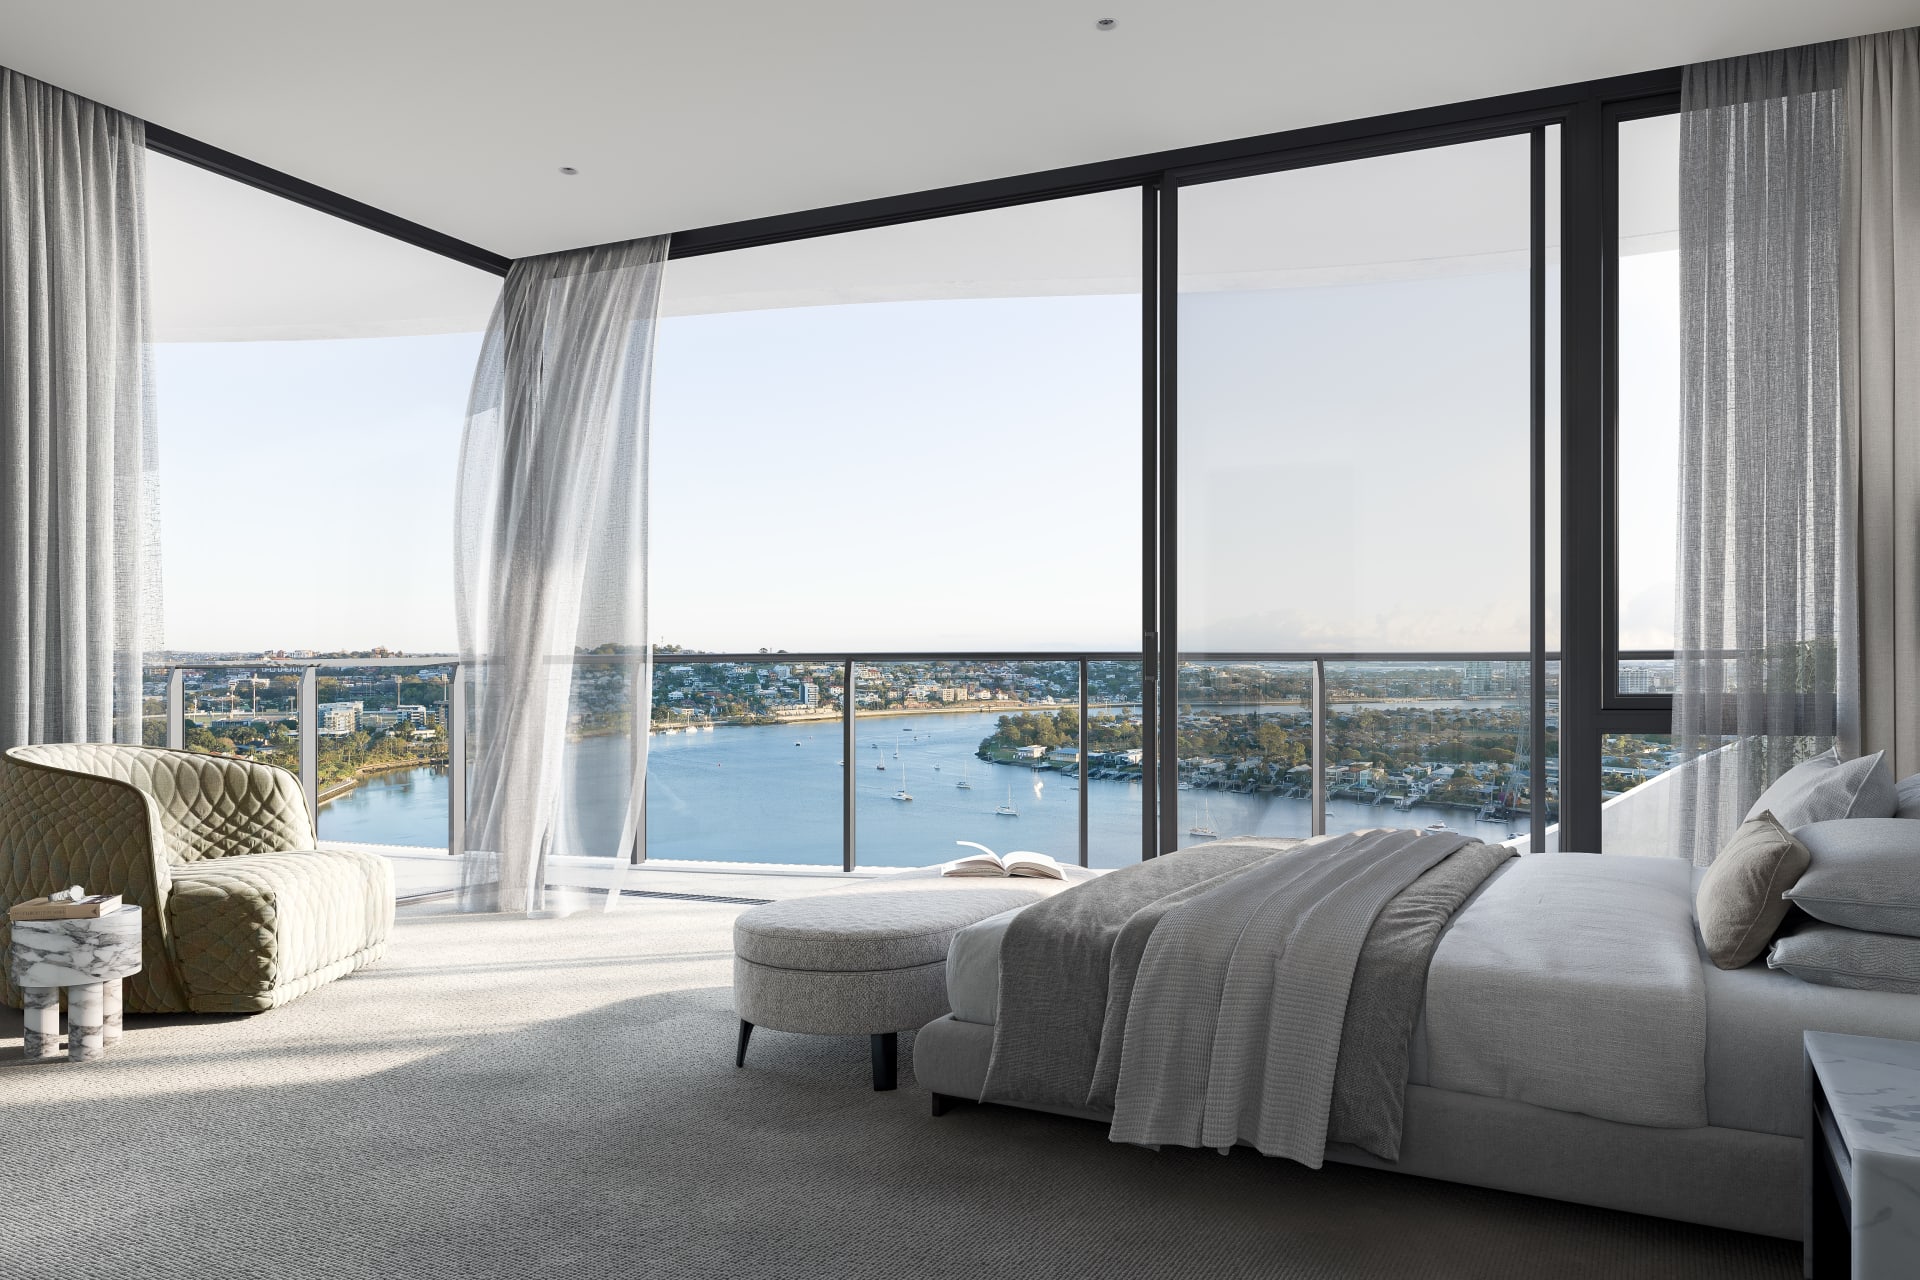 Construction starts at Mirvac's Quay Waterfront apartments in Brisbane's Newstead